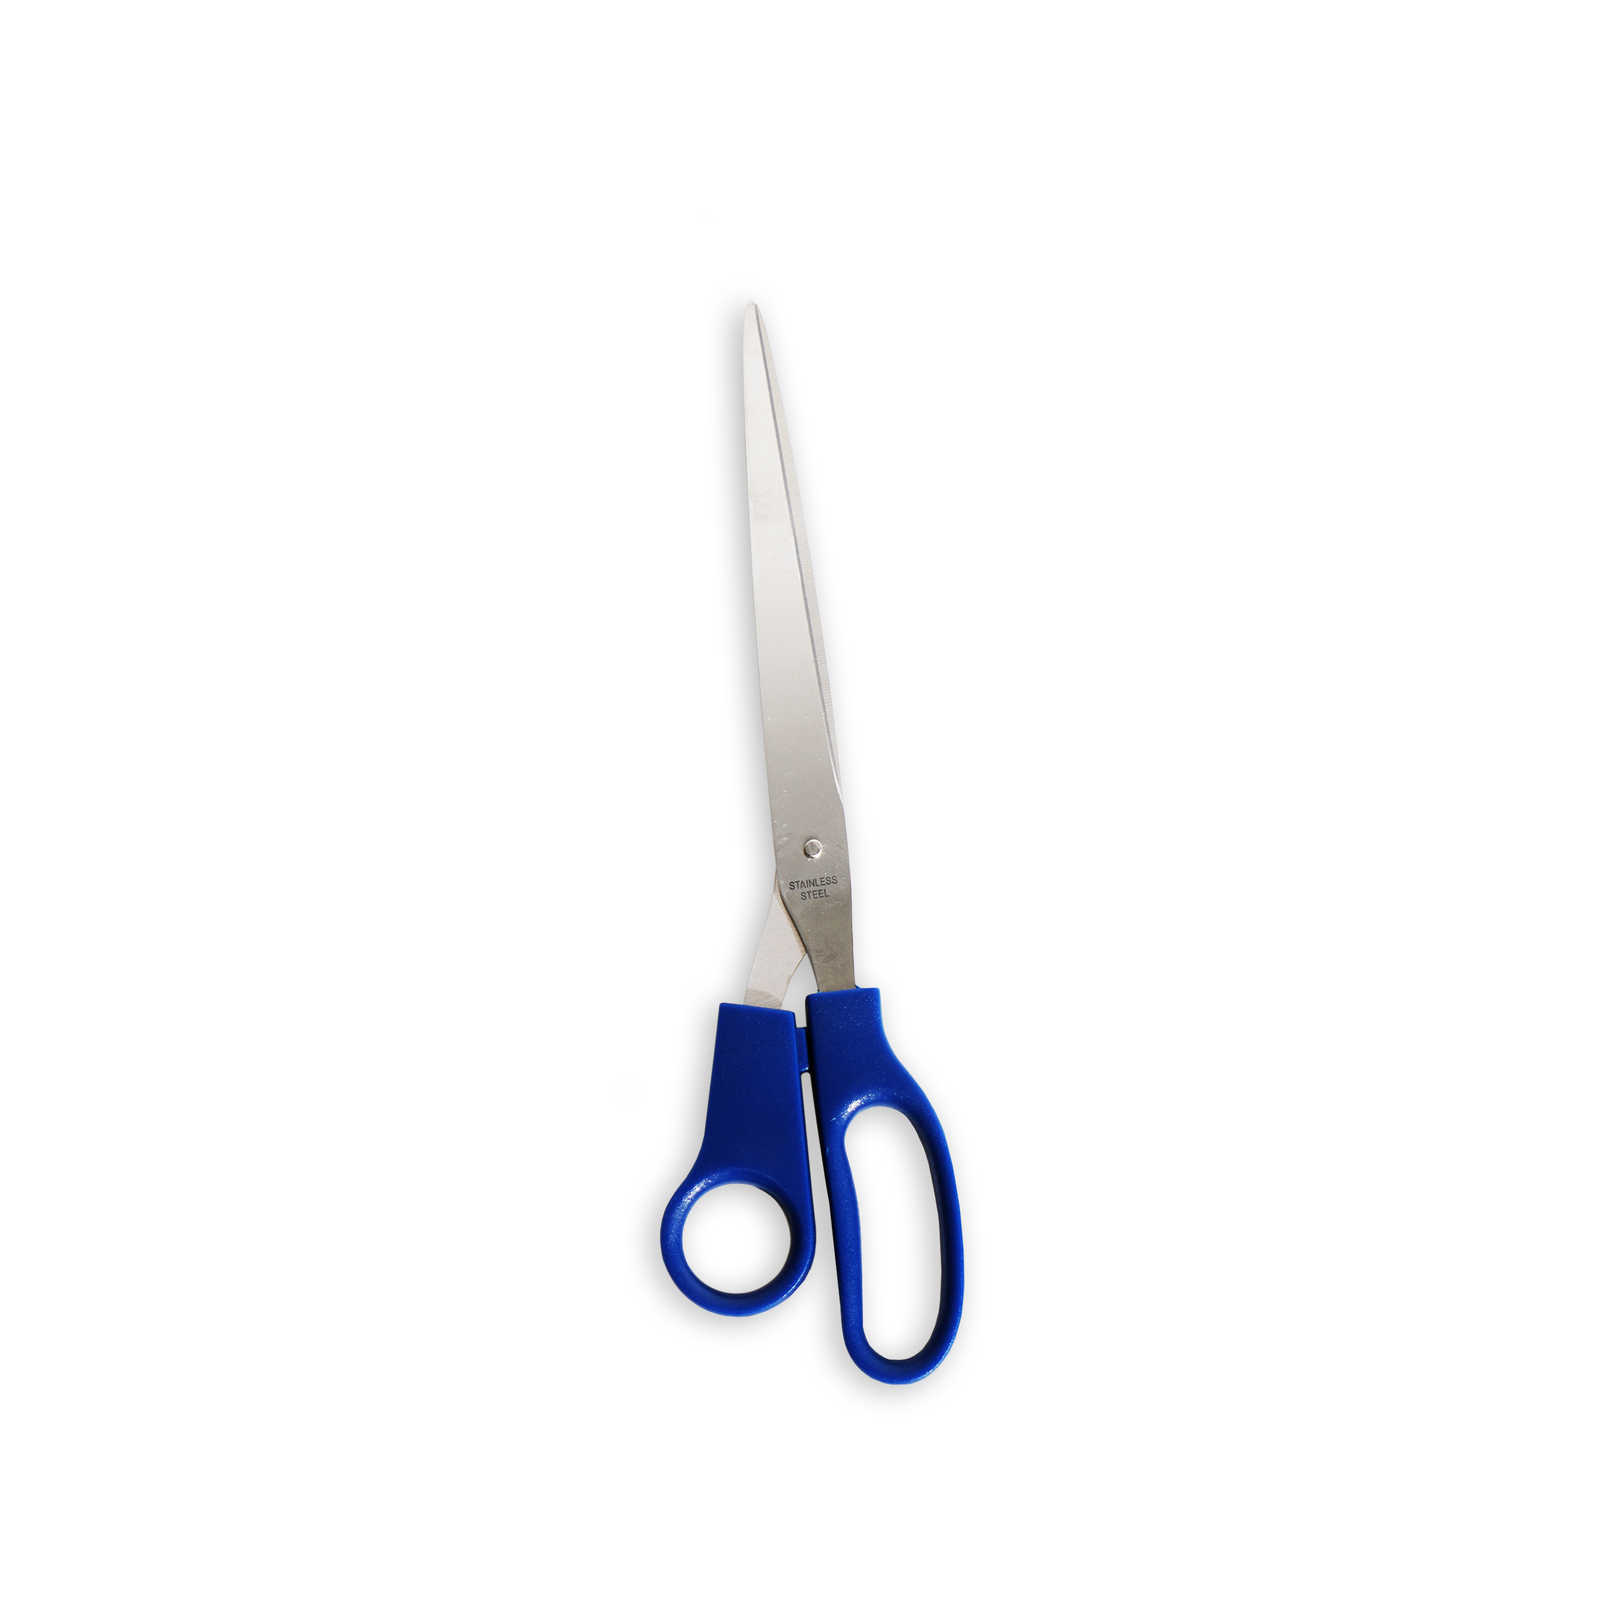         Wallpaper scissors 28cm in blue with stainless steel blade
    